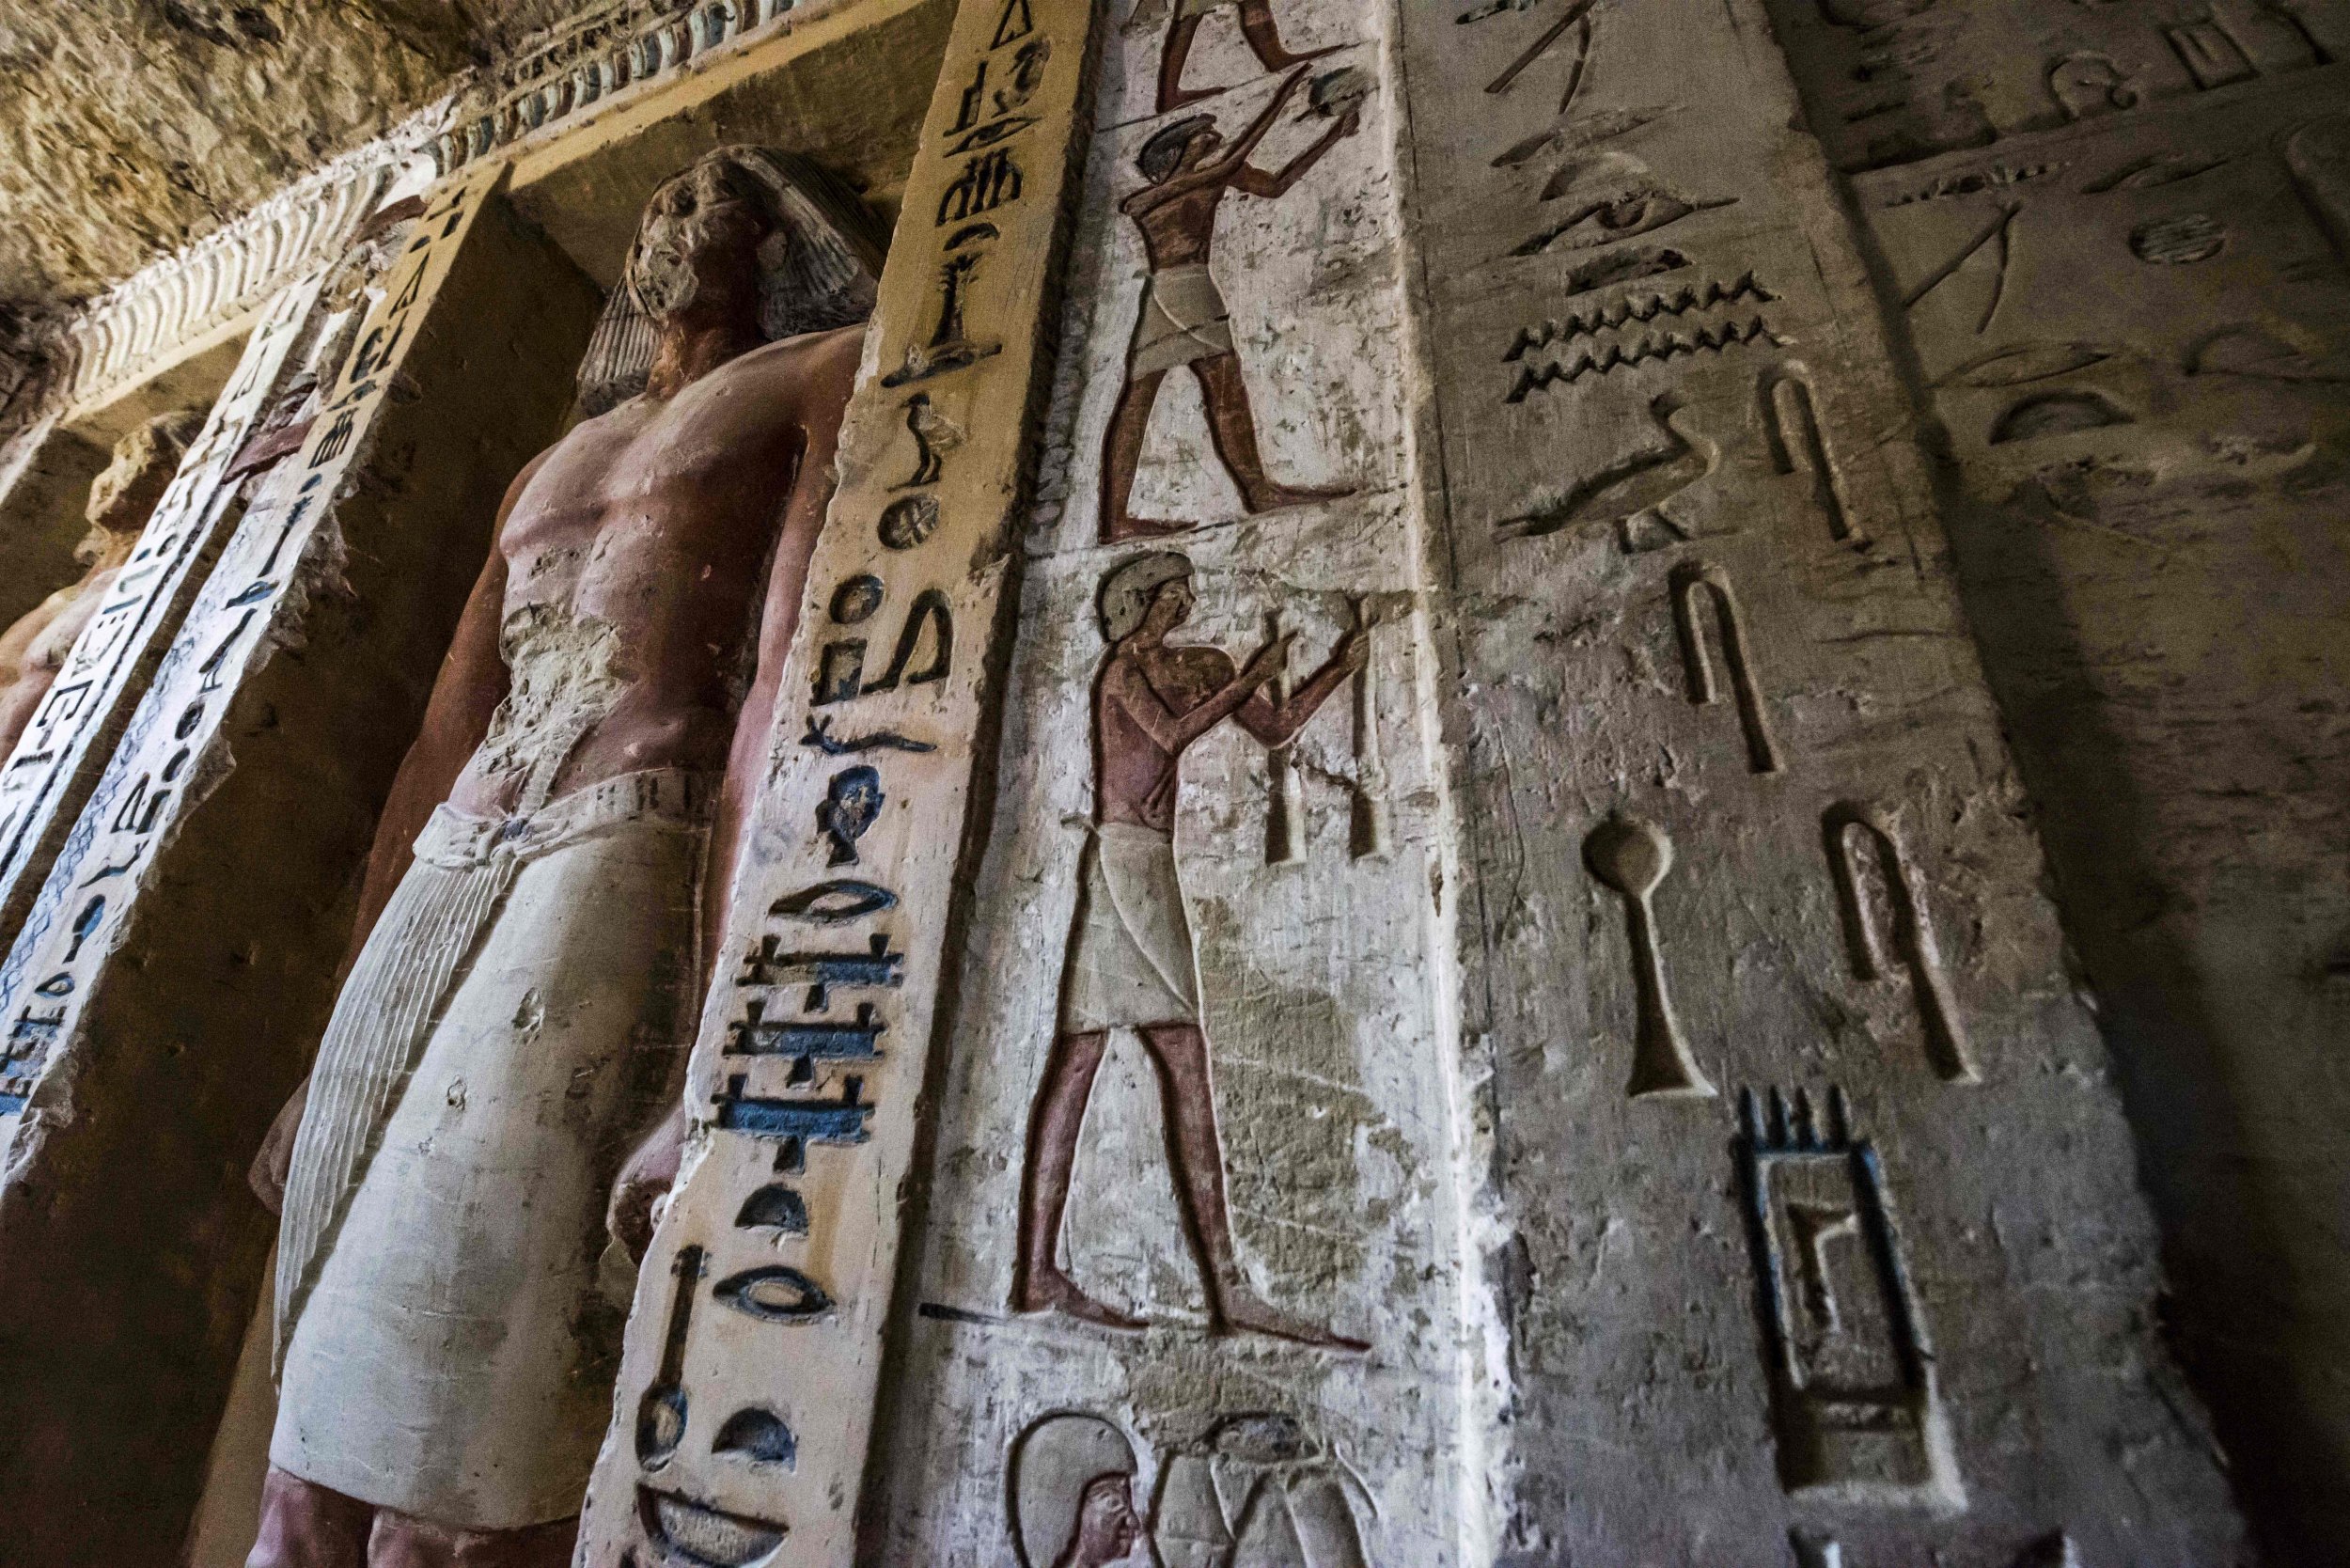 Ancient Egypt 4400 Year Old In Tact Tomb Of High Priest Discovered